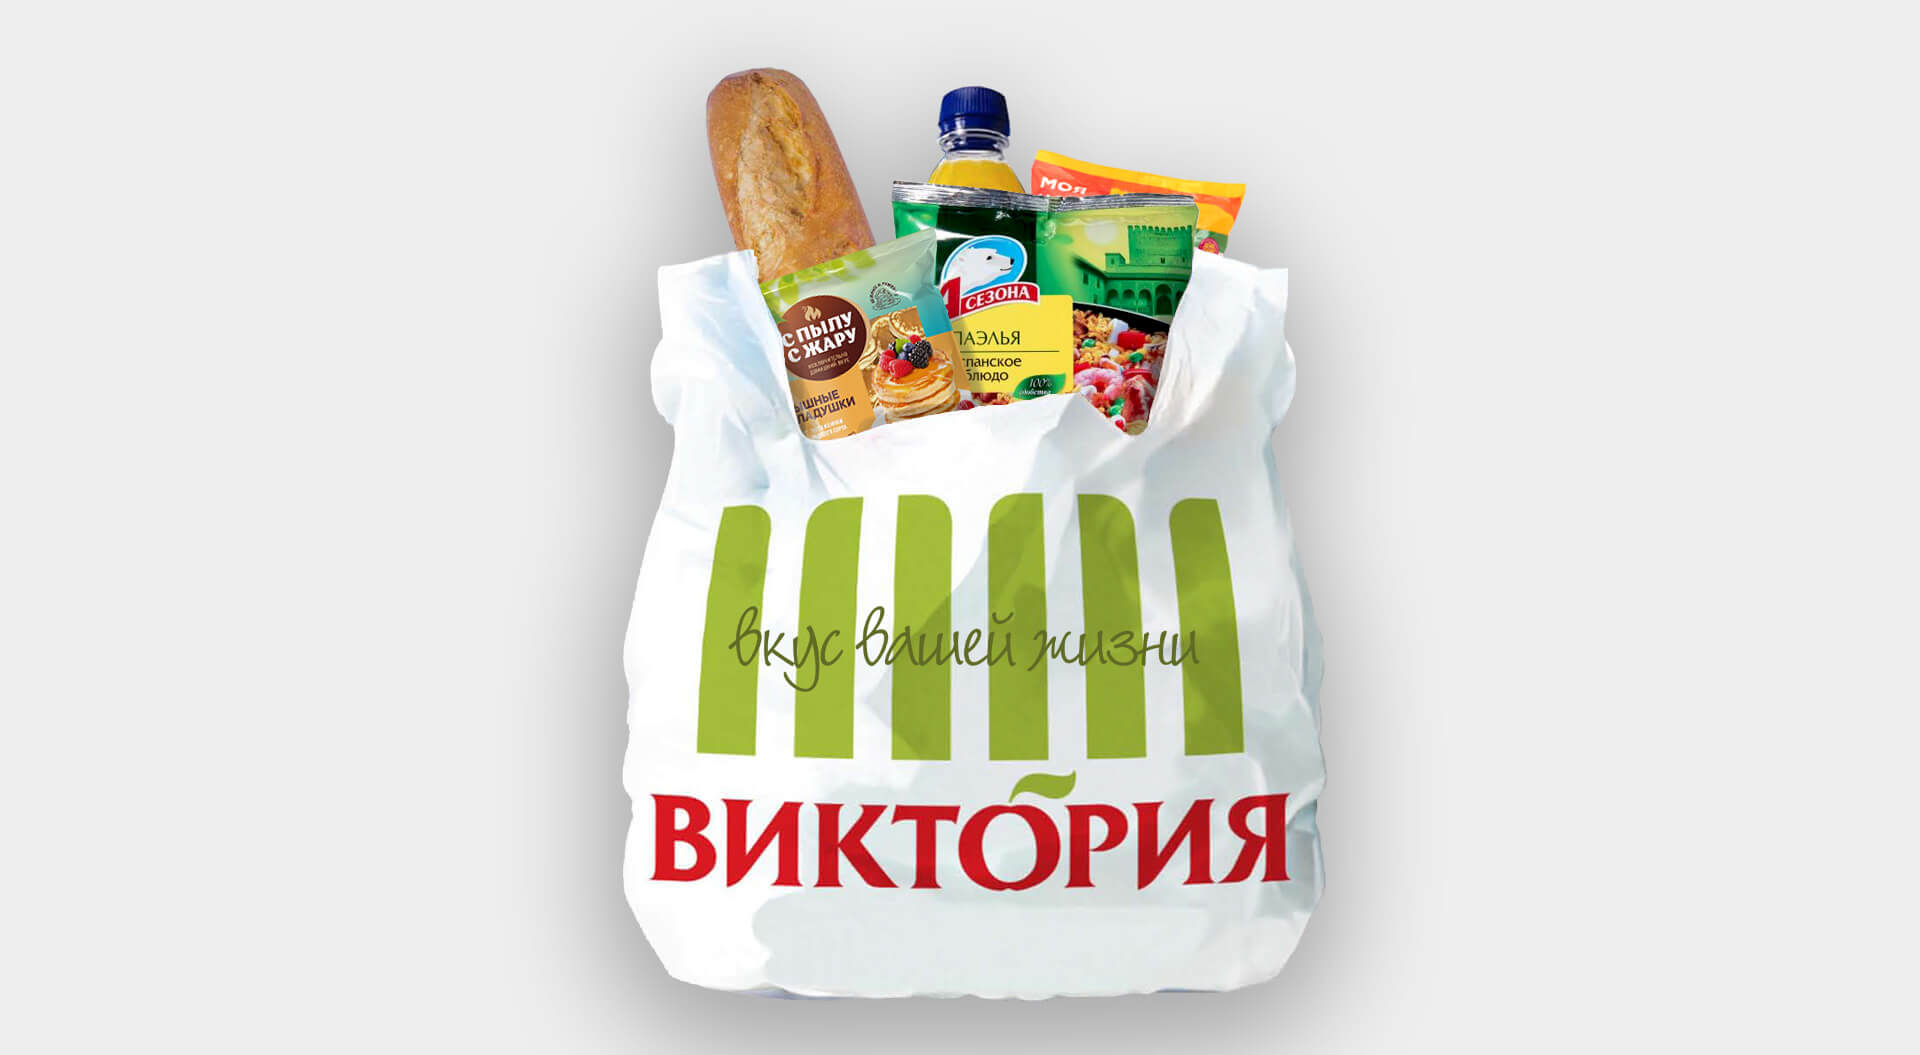 Victoria supermarkets Russia brand manual detail of shopping bag and strap-line